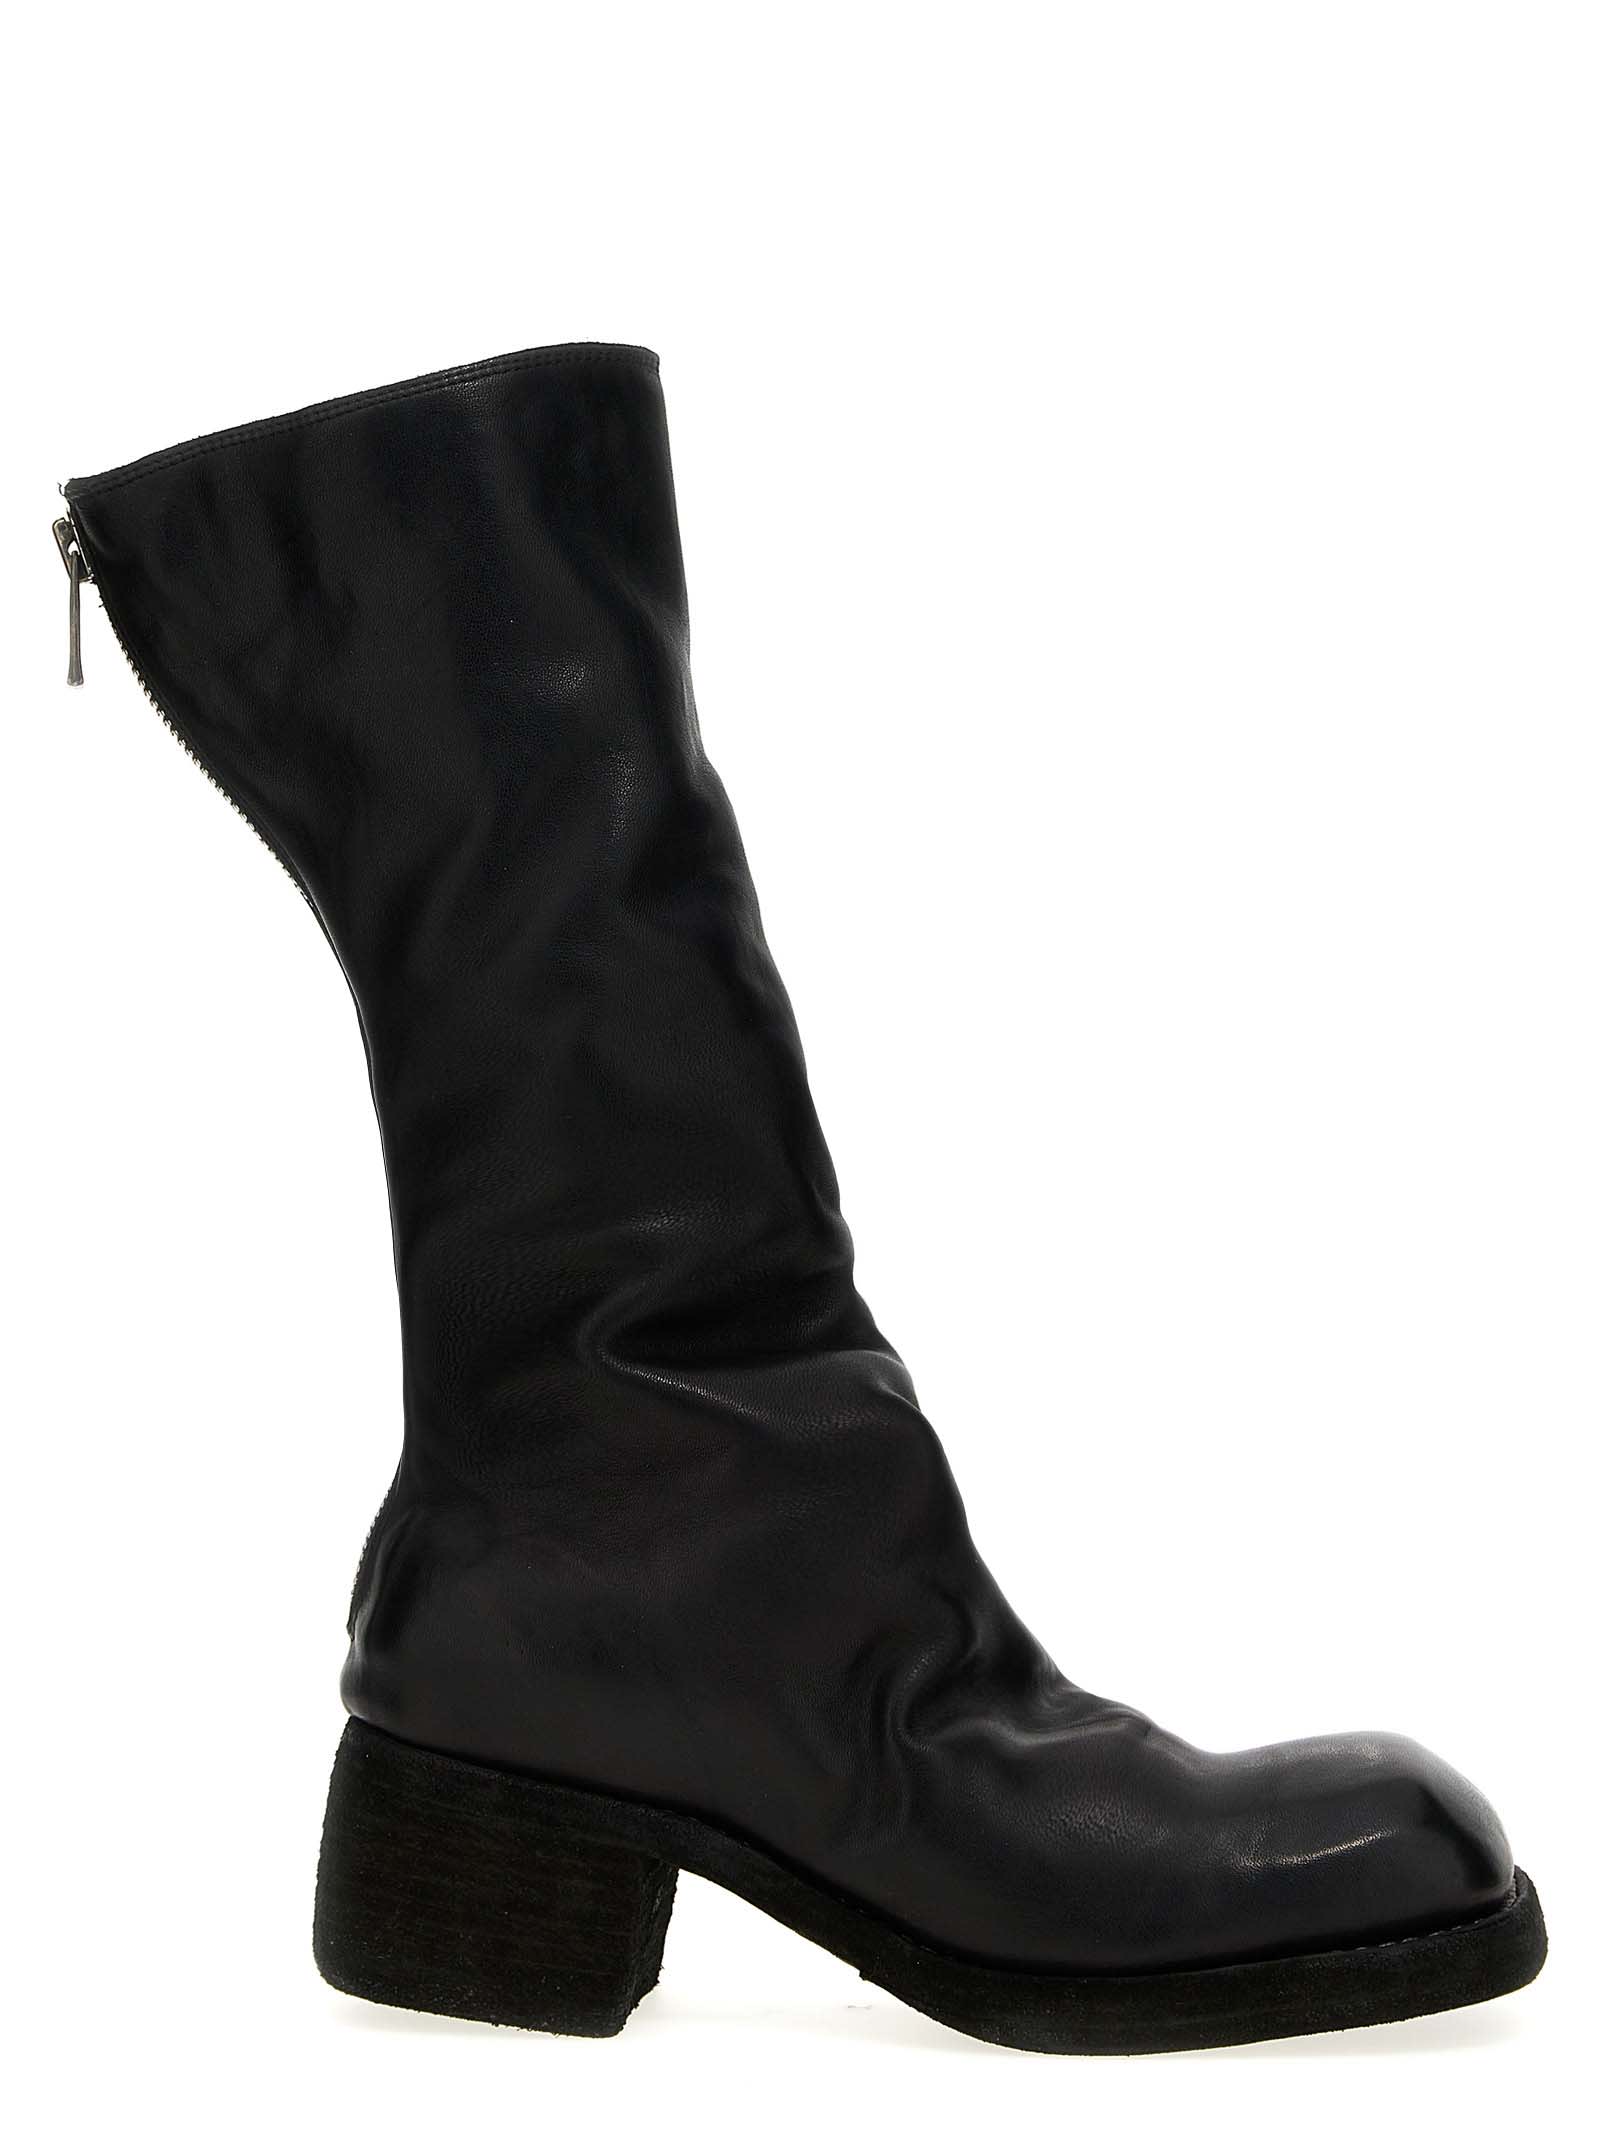 GUIDI 9089 ANKLE BOOTS